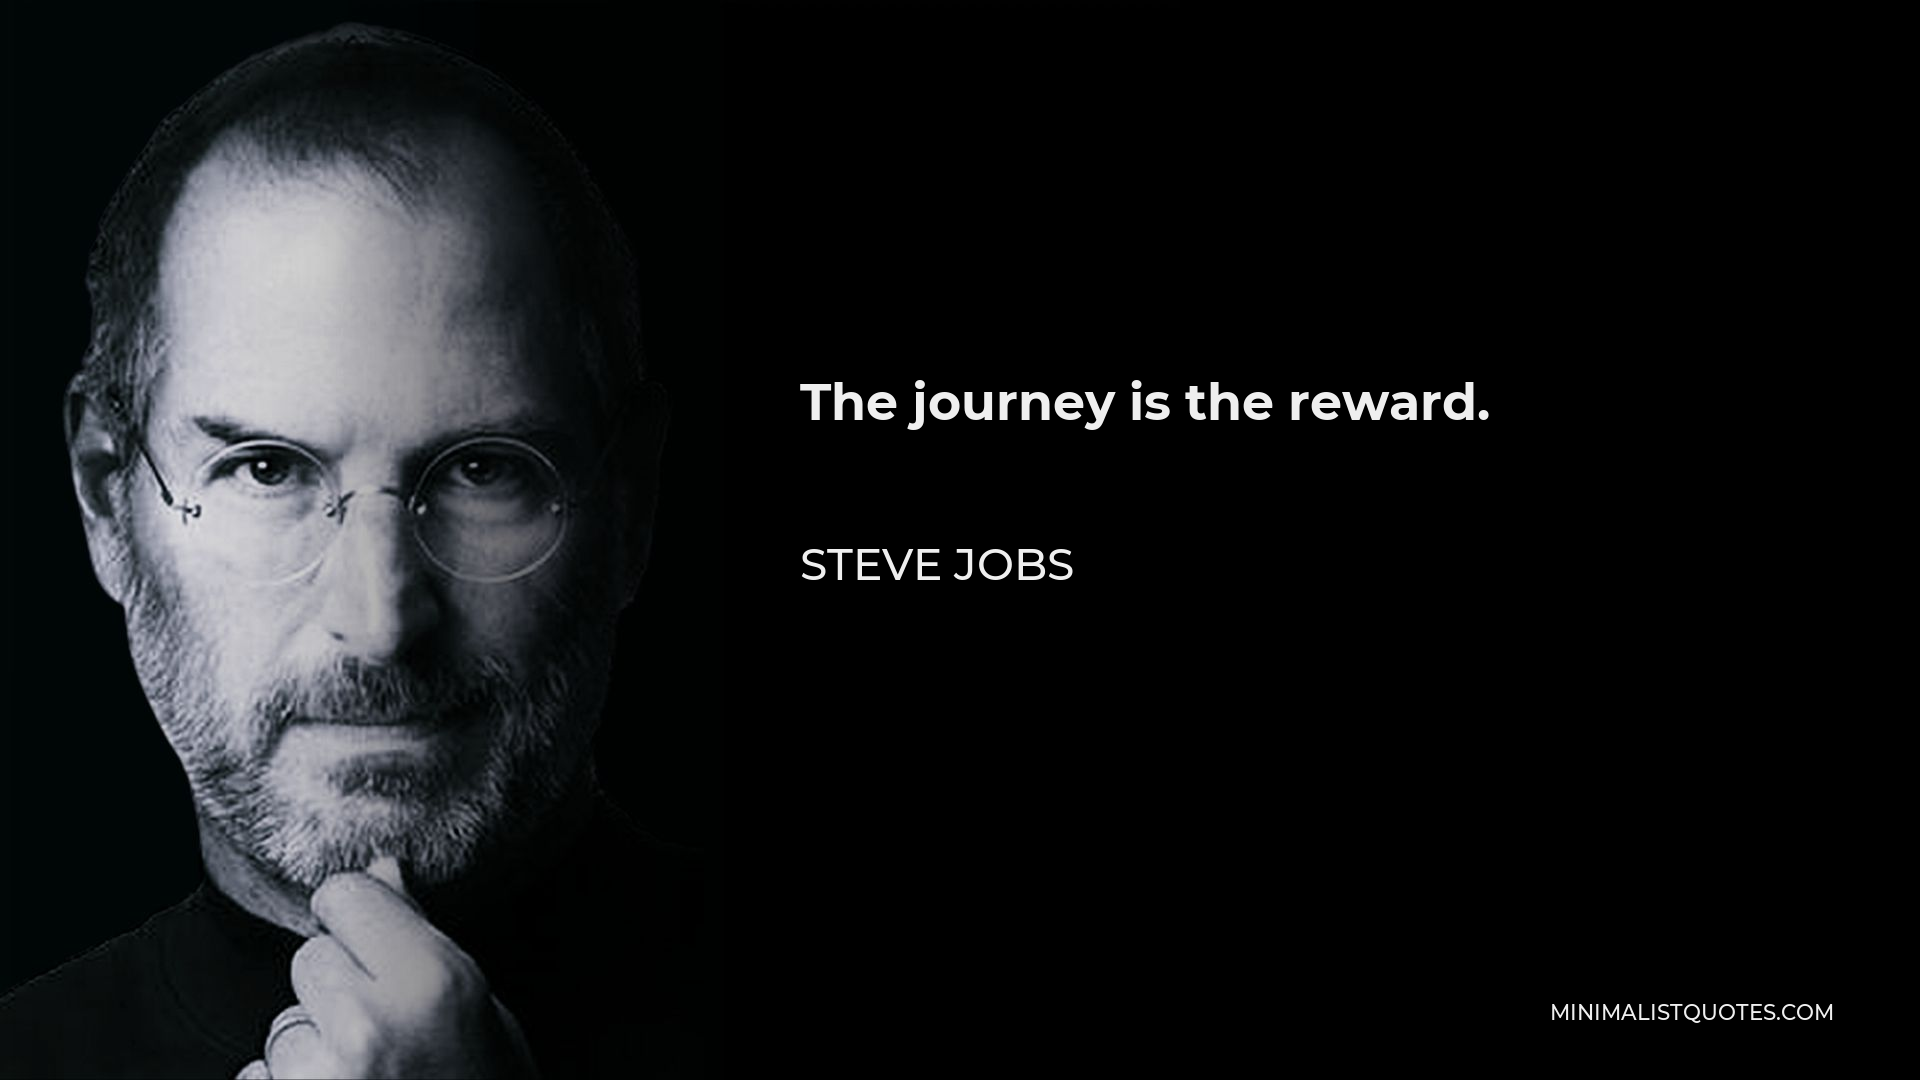 Steve Jobs Quote - The journey is the reward.